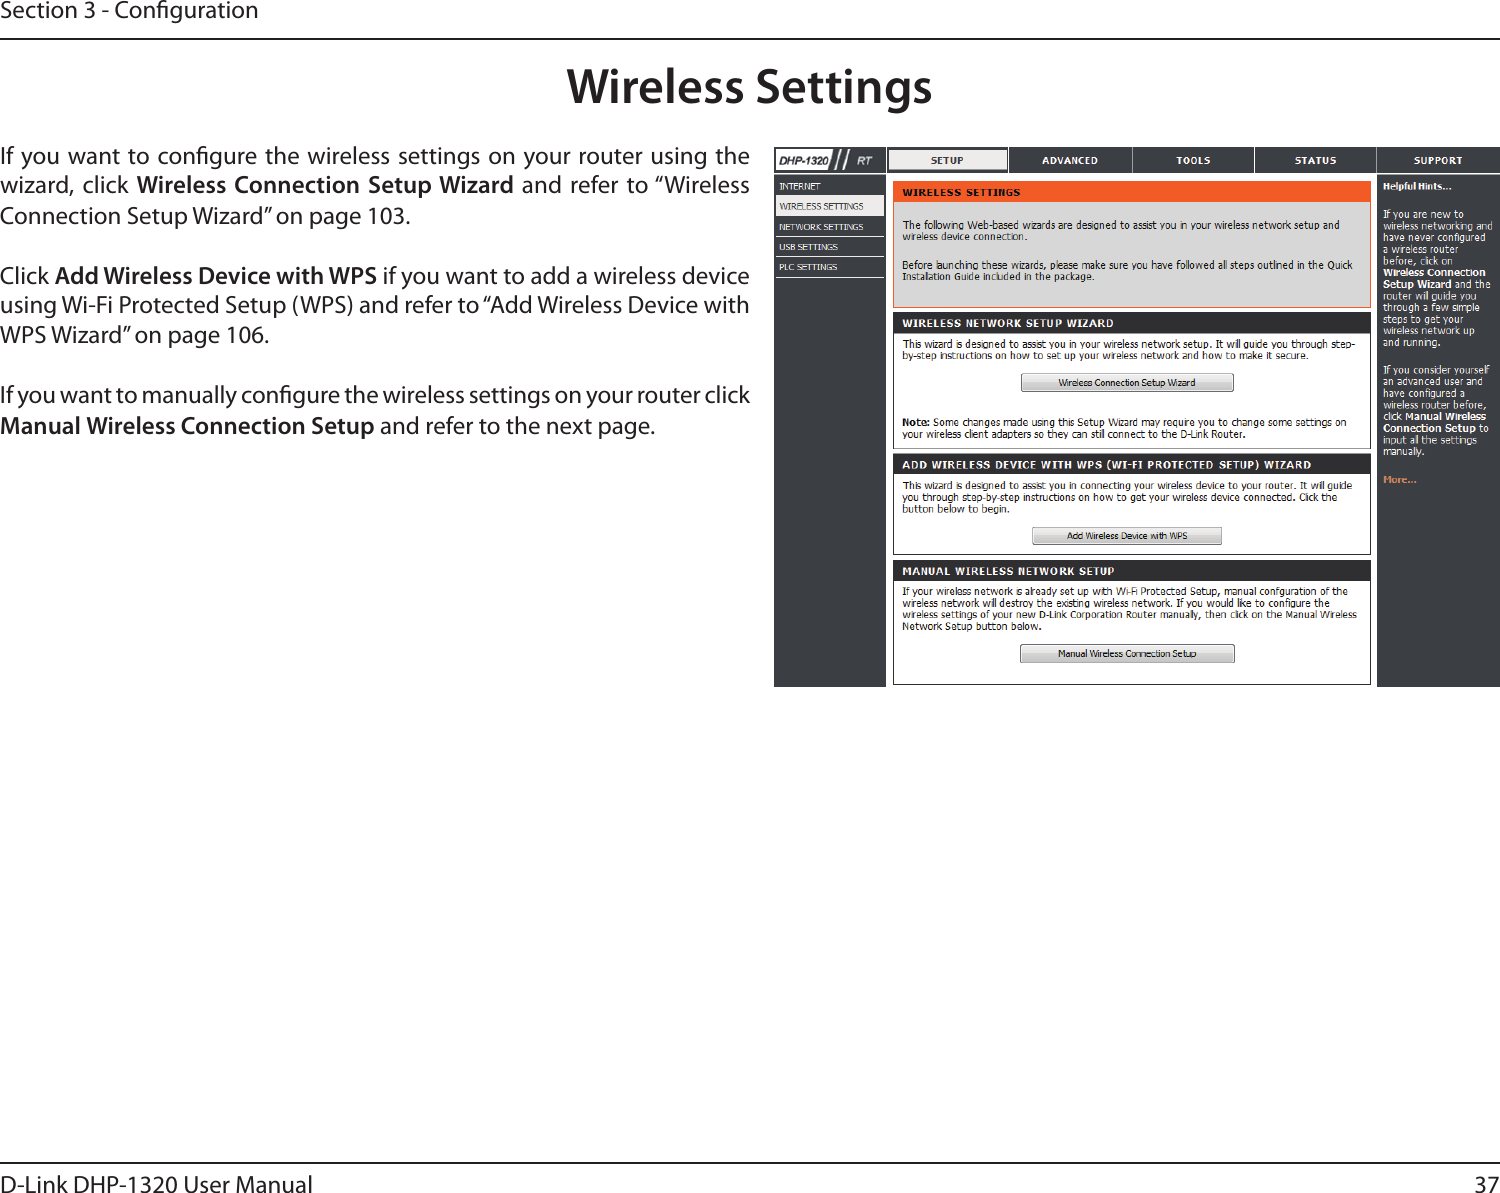 37D-Link DHP-1320 User ManualSection 3 - CongurationWireless SettingsIf you want to congure the wireless settings on your router using the wizard, click Wireless Connection Setup Wizard and refer to “Wireless Connection Setup Wizard” on page 103.Click Add Wireless Device with WPS if you want to add a wireless device using Wi-Fi Protected Setup (WPS) and refer to “Add Wireless Device with WPS Wizard” on page 106.If you want to manually congure the wireless settings on your router click Manual Wireless Connection Setup and refer to the next page.